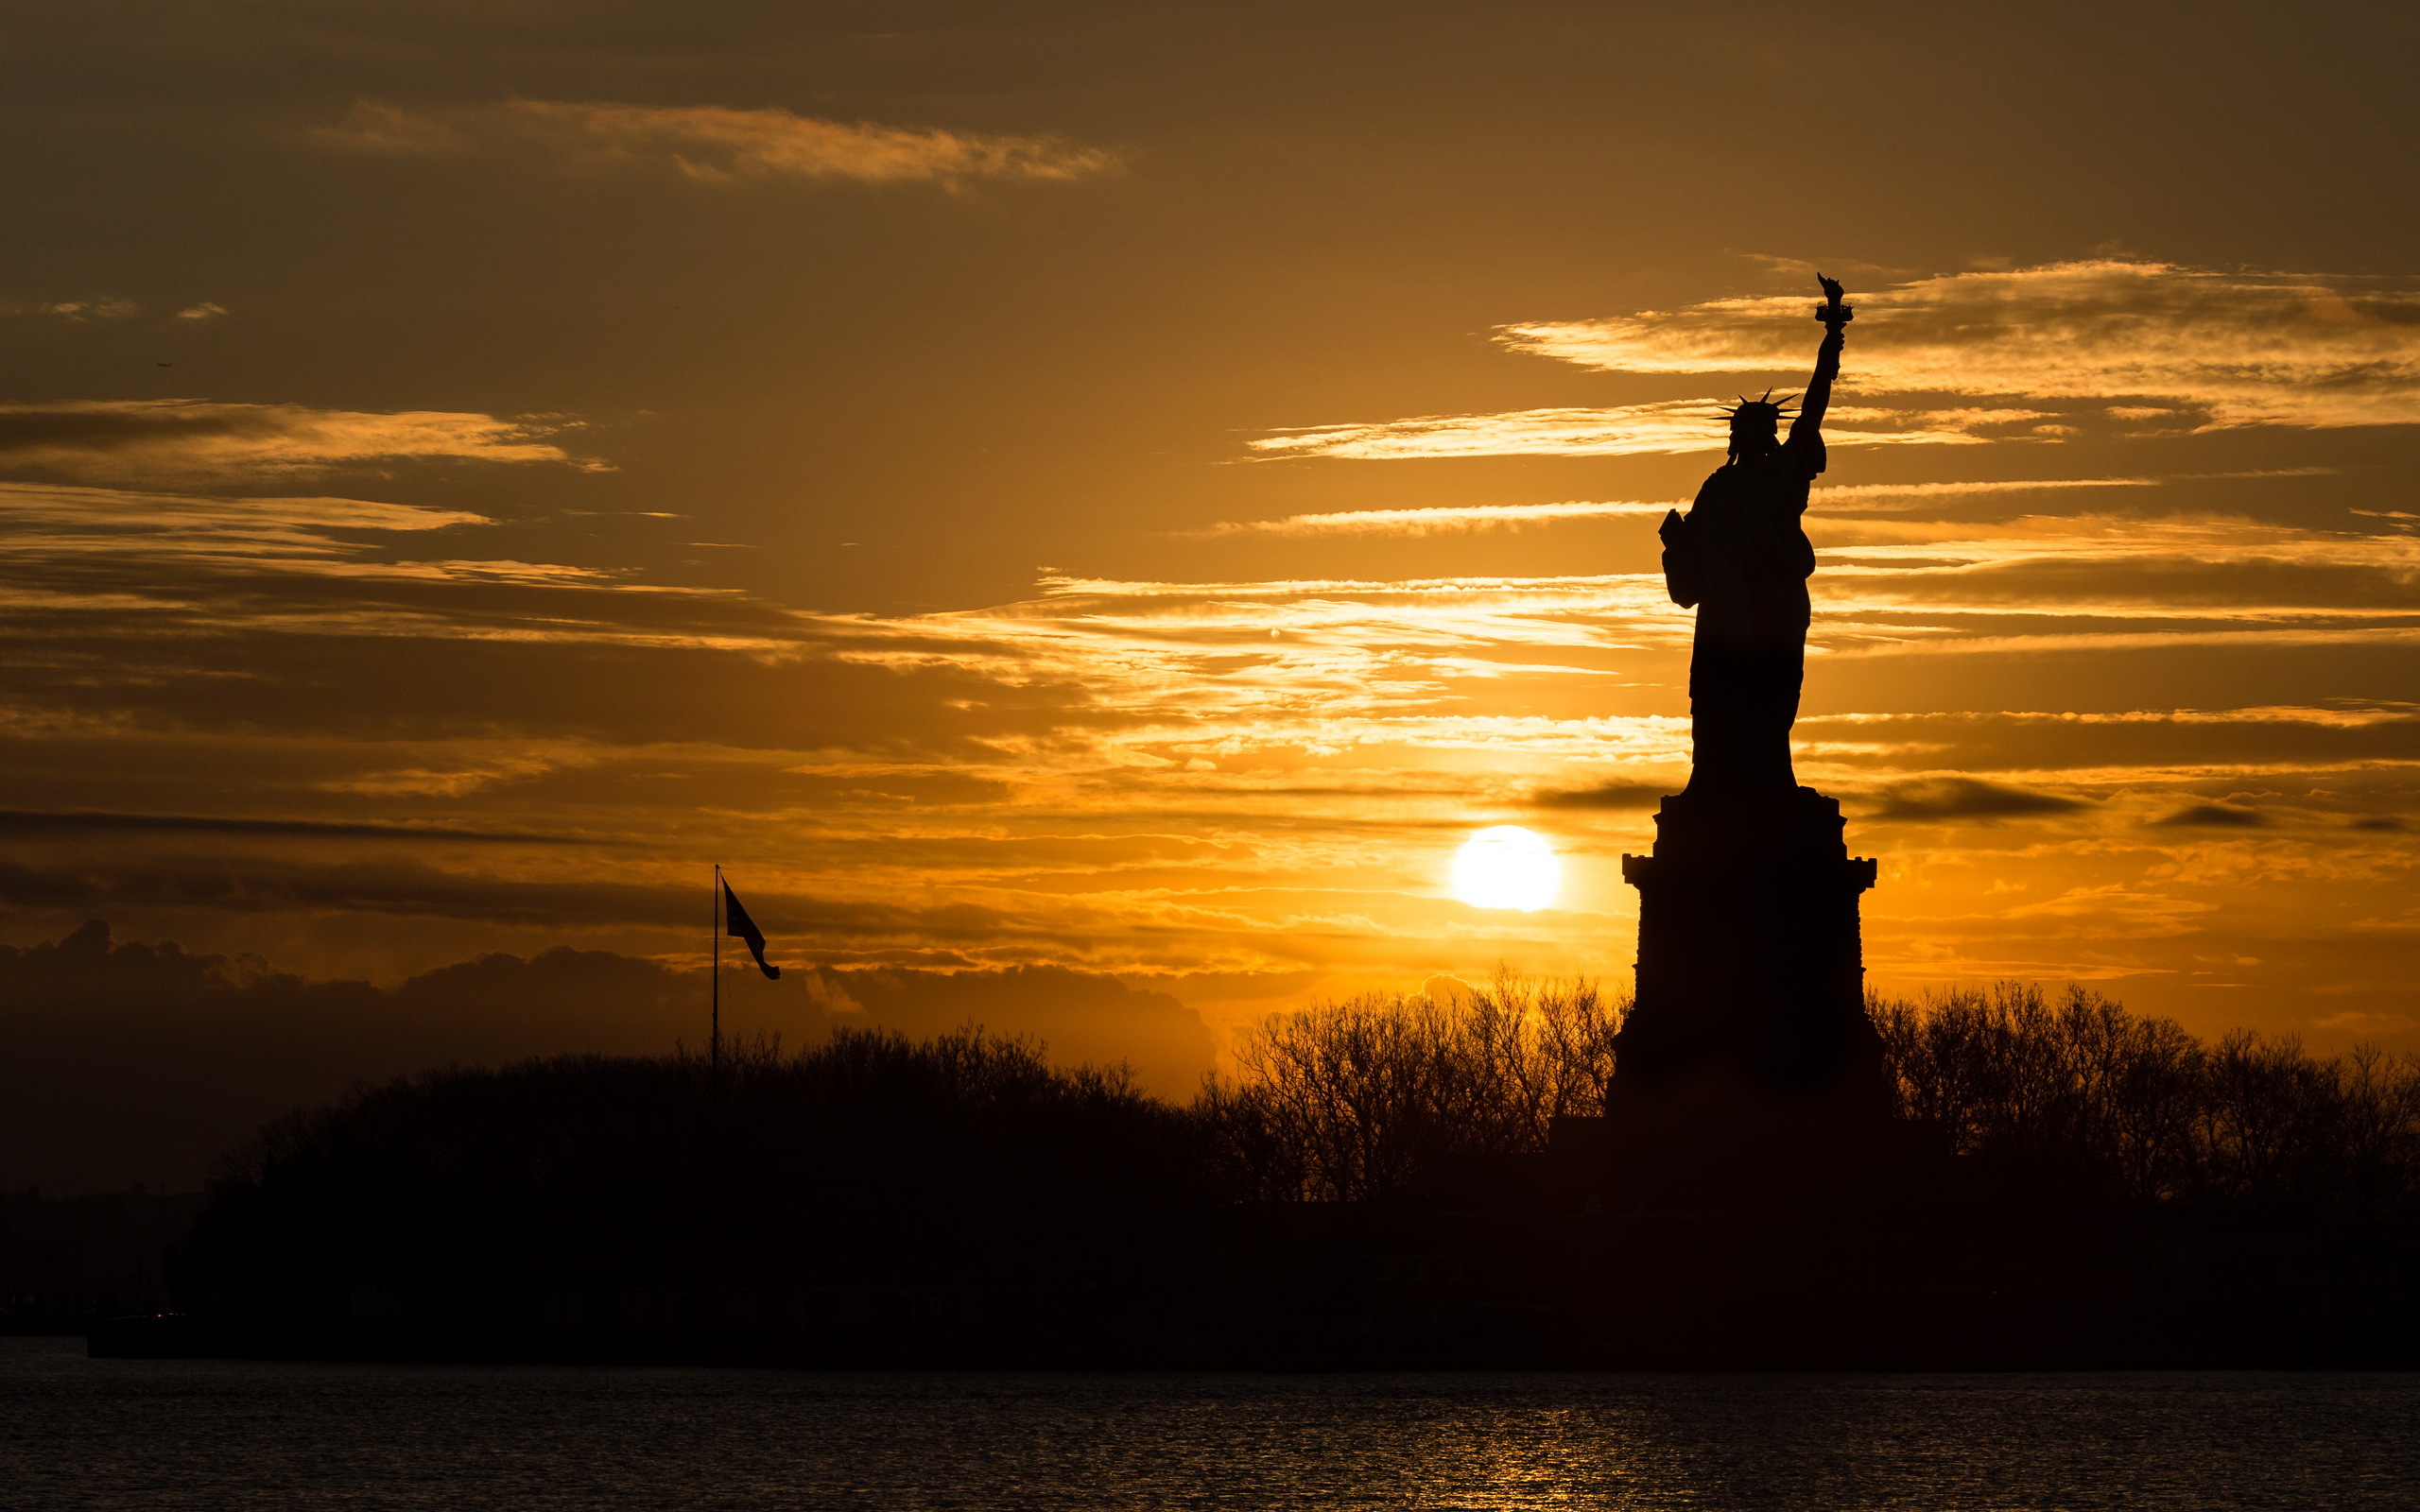 Statue Of Liberty Wallpaper Pictures Image